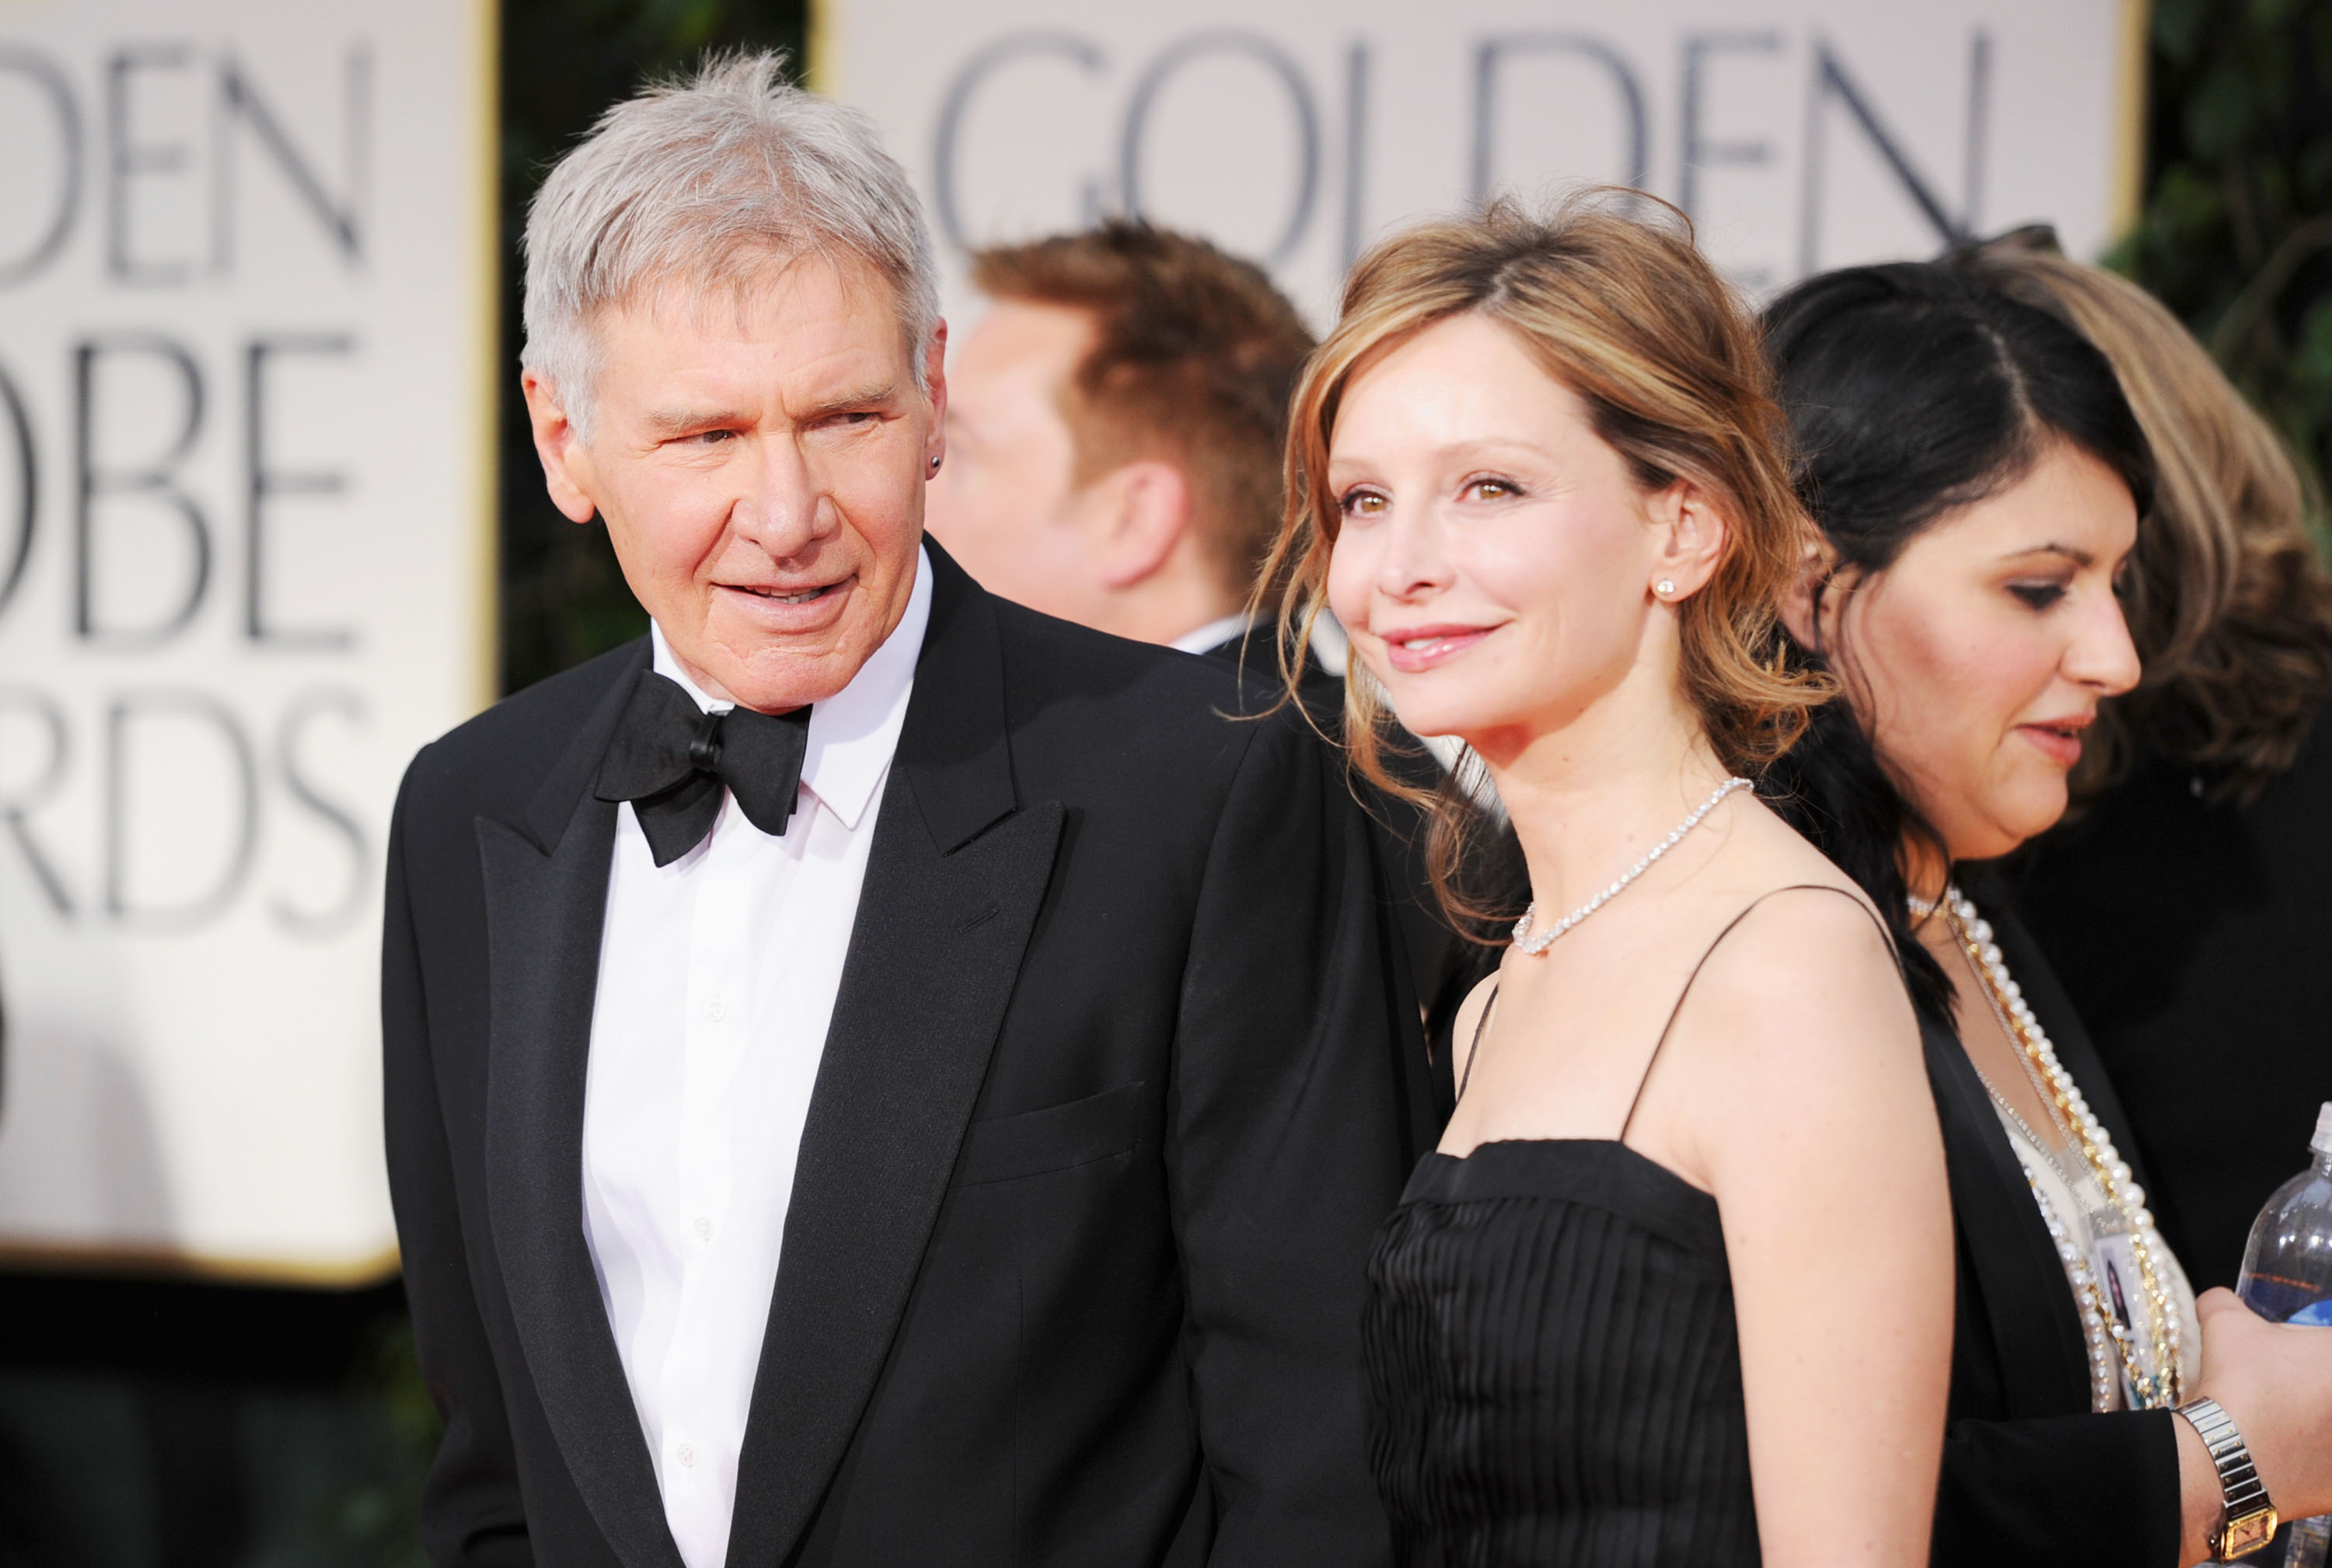 Harrison Ford and Calista Flockhart arrive at the 69th Annual Golden Globe Awards held at the Beverly Hilton Hotel on January 15, 2012 in Beverly Hills, California. | Source: Getty Images